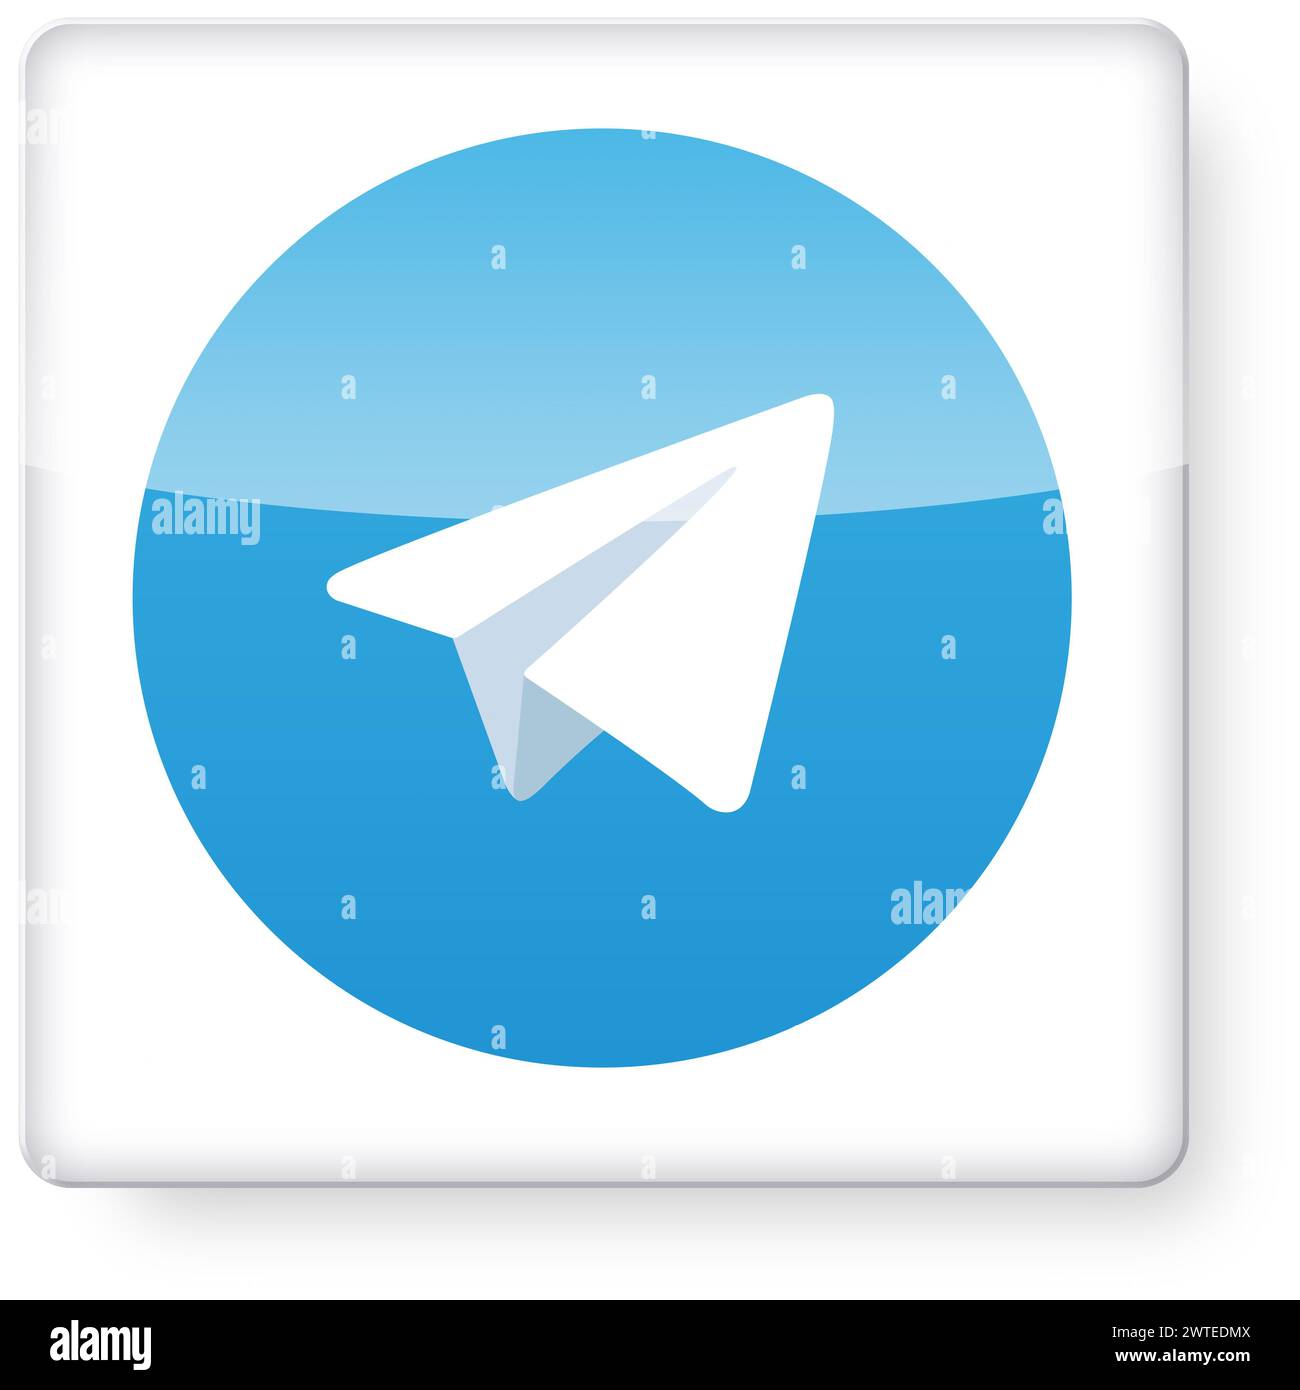 Telegram logo as an app icon. Clipping path included. Stock Photo